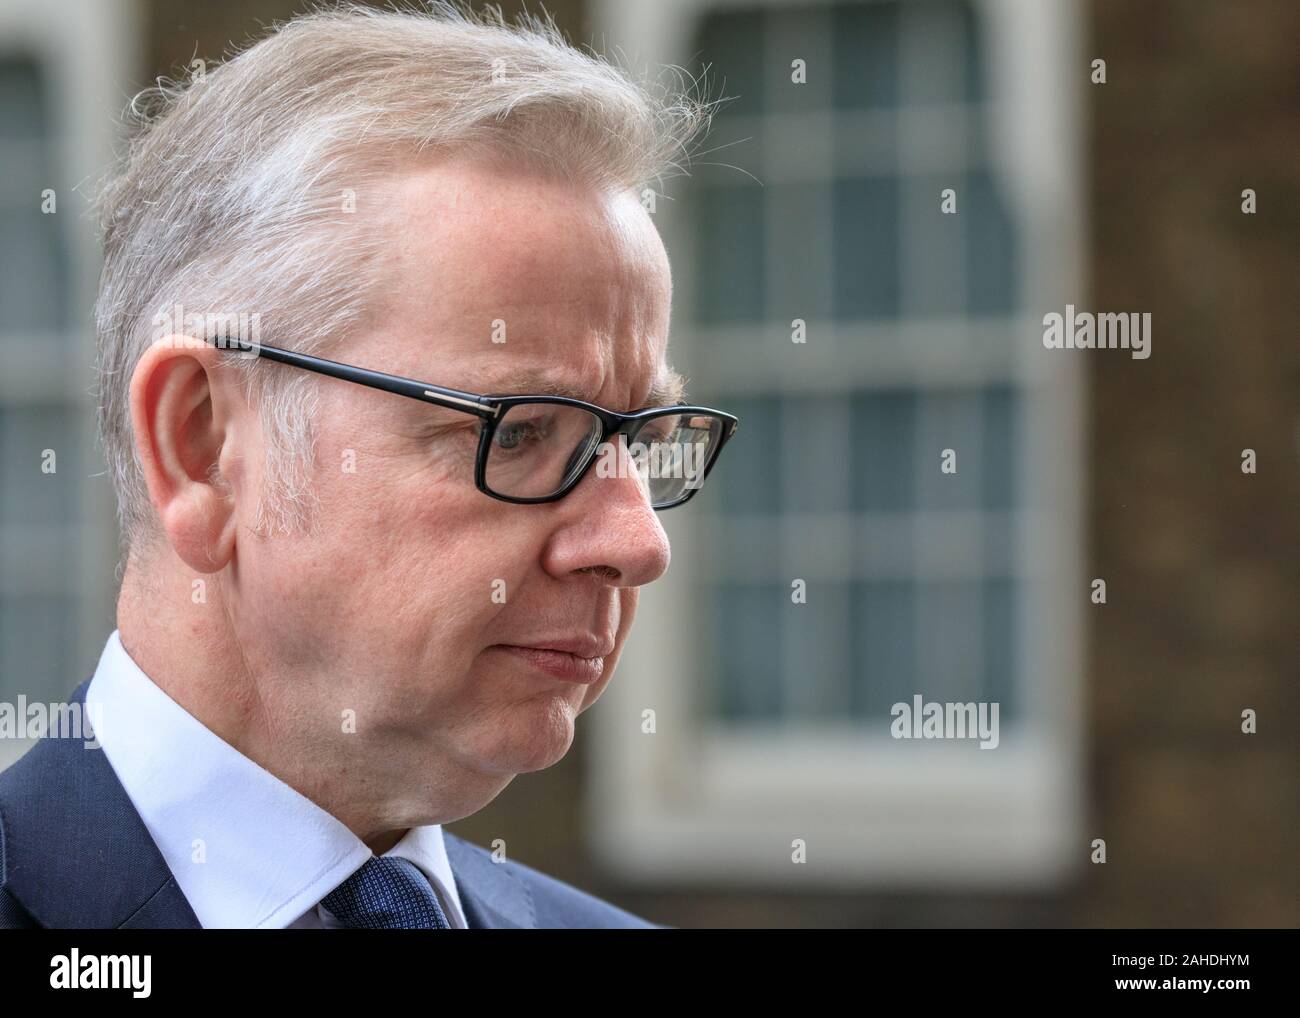 Michael Gove, Cabinet Minister, Chancellor of the Duchy of Lancaster, British Conservative Party politician, close up of face, side view Stock Photo